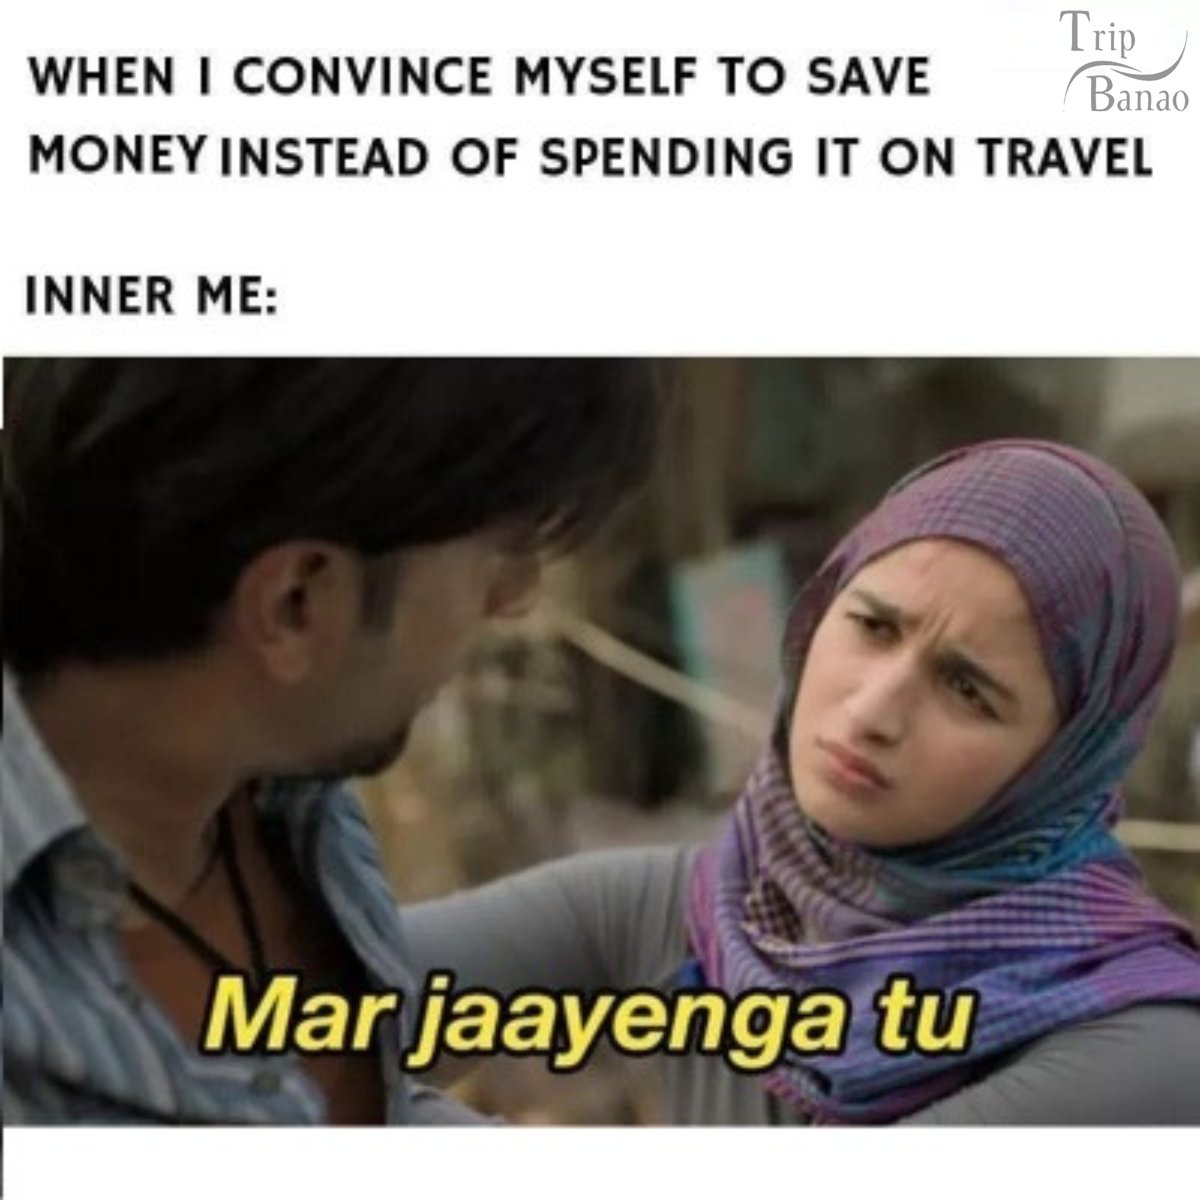 When I convince myself to save money instead of spending it on travel 😂 

#funnytravel #funnytravel #funnytravels #funnytravelpics #funnytravelmemes #funnytravelquotes #funnytravelvideos #funnytravelmoments #funnytravelstories #funnytravellers #tripbanao #tripbanaosocial #tripb